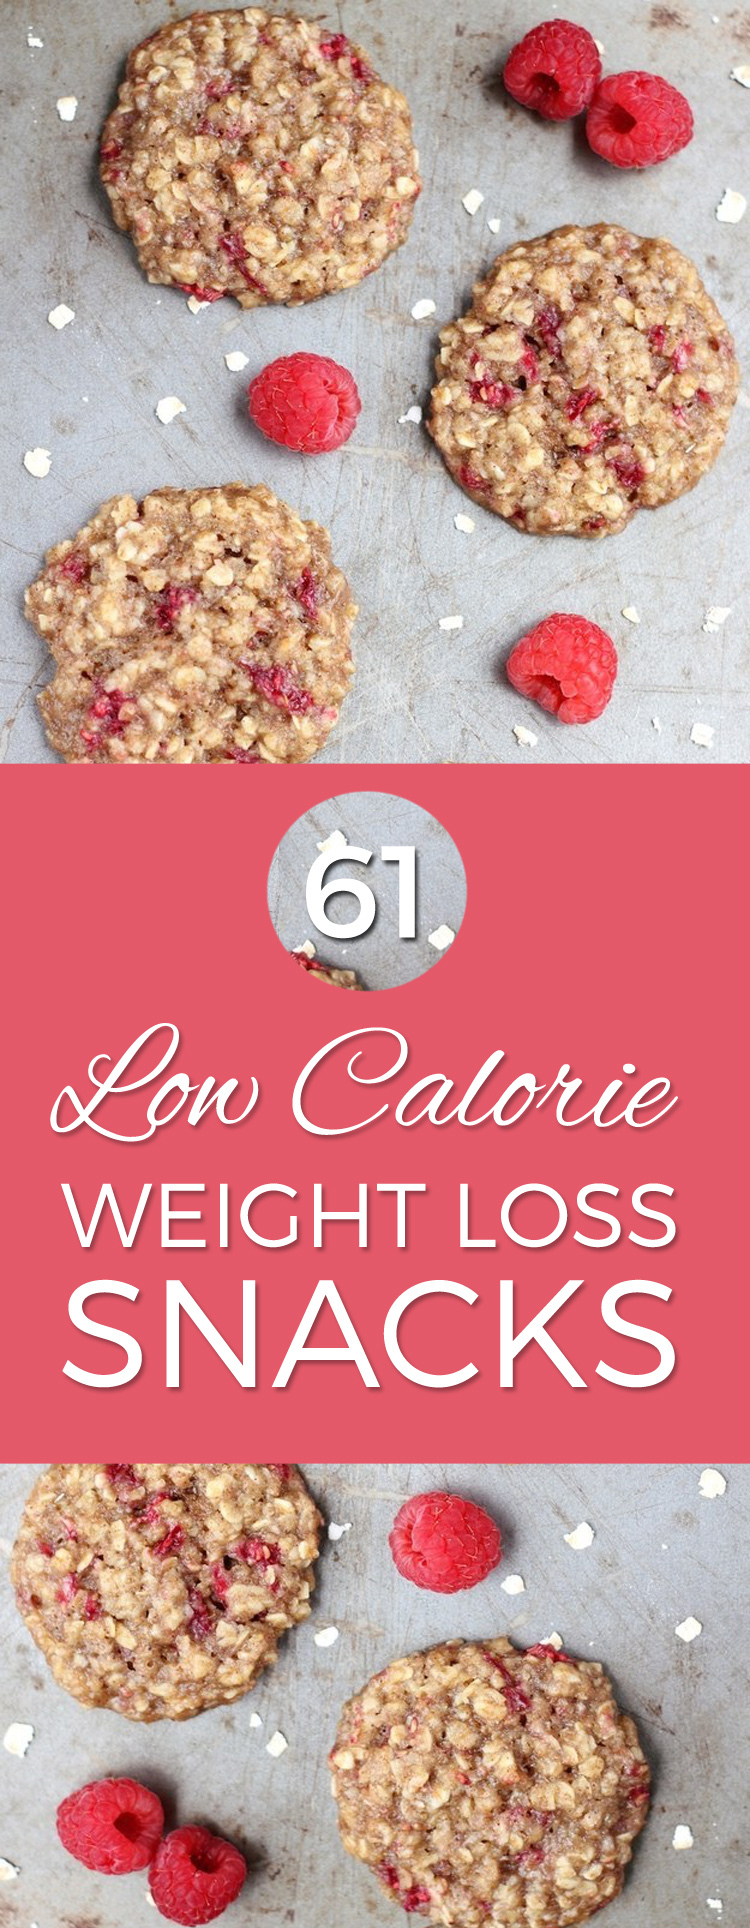 61 Super Healthy Super Low Calorie Snacks To Help You Lose Weight!